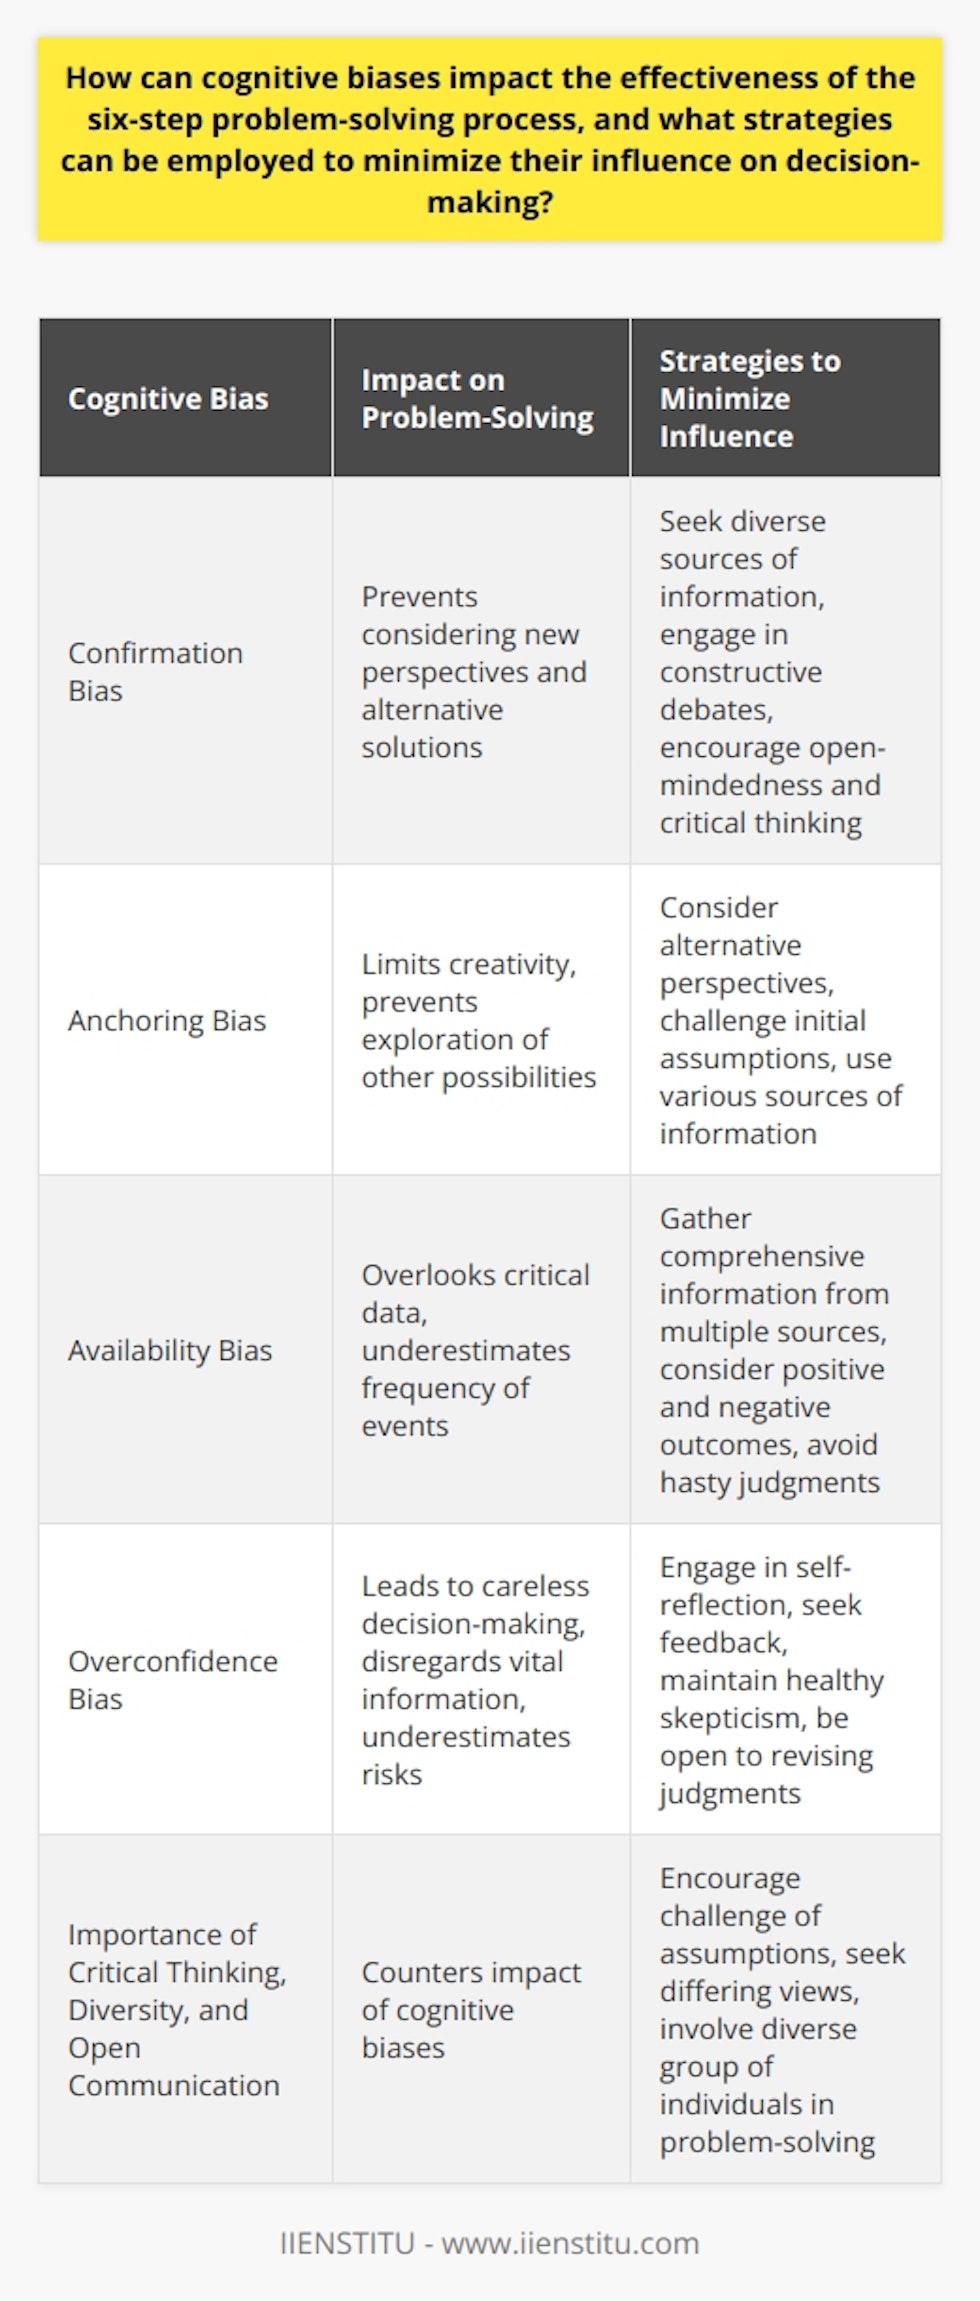 Cognitive biases refer to the systematic errors in thinking that humans tend to make as a result of their cognitive processes. These biases can significantly impact the effectiveness of the six-step problem-solving process, which is a structured approach to finding solutions. Understanding and recognizing these biases is crucial to making informed decisions and minimizing their influence.One common cognitive bias is known as confirmation bias. This bias occurs when individuals seek out information that supports their existing beliefs or hypotheses while ignoring or downplaying contradictory evidence. Confirmation bias can hinder the problem-solving process by preventing new perspectives and alternative solutions from being considered. To minimize its impact, individuals should actively seek out diverse sources of information, engage in constructive debates, and encourage open-mindedness and critical thinking.Another cognitive bias that can affect problem-solving is the anchoring bias. This bias occurs when individuals rely too heavily on the first piece of information or initial impression they encounter when making judgments or decisions. Anchoring bias can limit creativity and prevent individuals from exploring other possibilities. To reduce its influence, it is essential to consider alternative perspectives, challenge initial assumptions, and use various sources of information to gather a more comprehensive view of the problem.The availability bias is another cognitive bias that can hamper the problem-solving process. This bias occurs when individuals rely on readily available information that comes to mind easily, rather than considering all relevant information. This can lead to overlooking critical data or underestimating the frequency of certain events, leading to flawed judgments and decisions. Mitigating this bias involves striving to gather comprehensive information from multiple sources, considering both positive and negative outcomes, and avoiding hasty judgments based on easily recalled events.The overconfidence bias is yet another cognitive bias that can impact problem-solving effectiveness. This bias occurs when individuals overestimate their abilities or the accuracy of their judgments. Overconfidence can lead to careless decision-making, disregarding potentially vital information, and underestimating risks. To minimize this bias, individuals should engage in self-reflection and seek feedback from others, as well as maintain a healthy skepticism and be open to revising their initial judgments.To further reduce the influence of cognitive biases on the problem-solving process, it is crucial to foster a culture of critical thinking, diversity of perspectives, and open communication. Encouraging individuals to challenge their own assumptions and actively seek out differing views can help counteract the impact of cognitive biases. Additionally, involving a diverse group of individuals in the problem-solving process can bring about varying viewpoints and increase the likelihood of a comprehensive and effective solution.In conclusion, cognitive biases can have a significant impact on the effectiveness of the six-step problem-solving process. Understanding and recognizing these biases is the first step in mitigating their influence. By employing strategies such as seeking diverse information, challenging initial assumptions, considering alternative perspectives, and fostering a culture of critical thinking, individuals can make more informed and objective decisions. Minimizing the impact of cognitive biases ultimately leads to more effective problem-solving and decision-making processes.